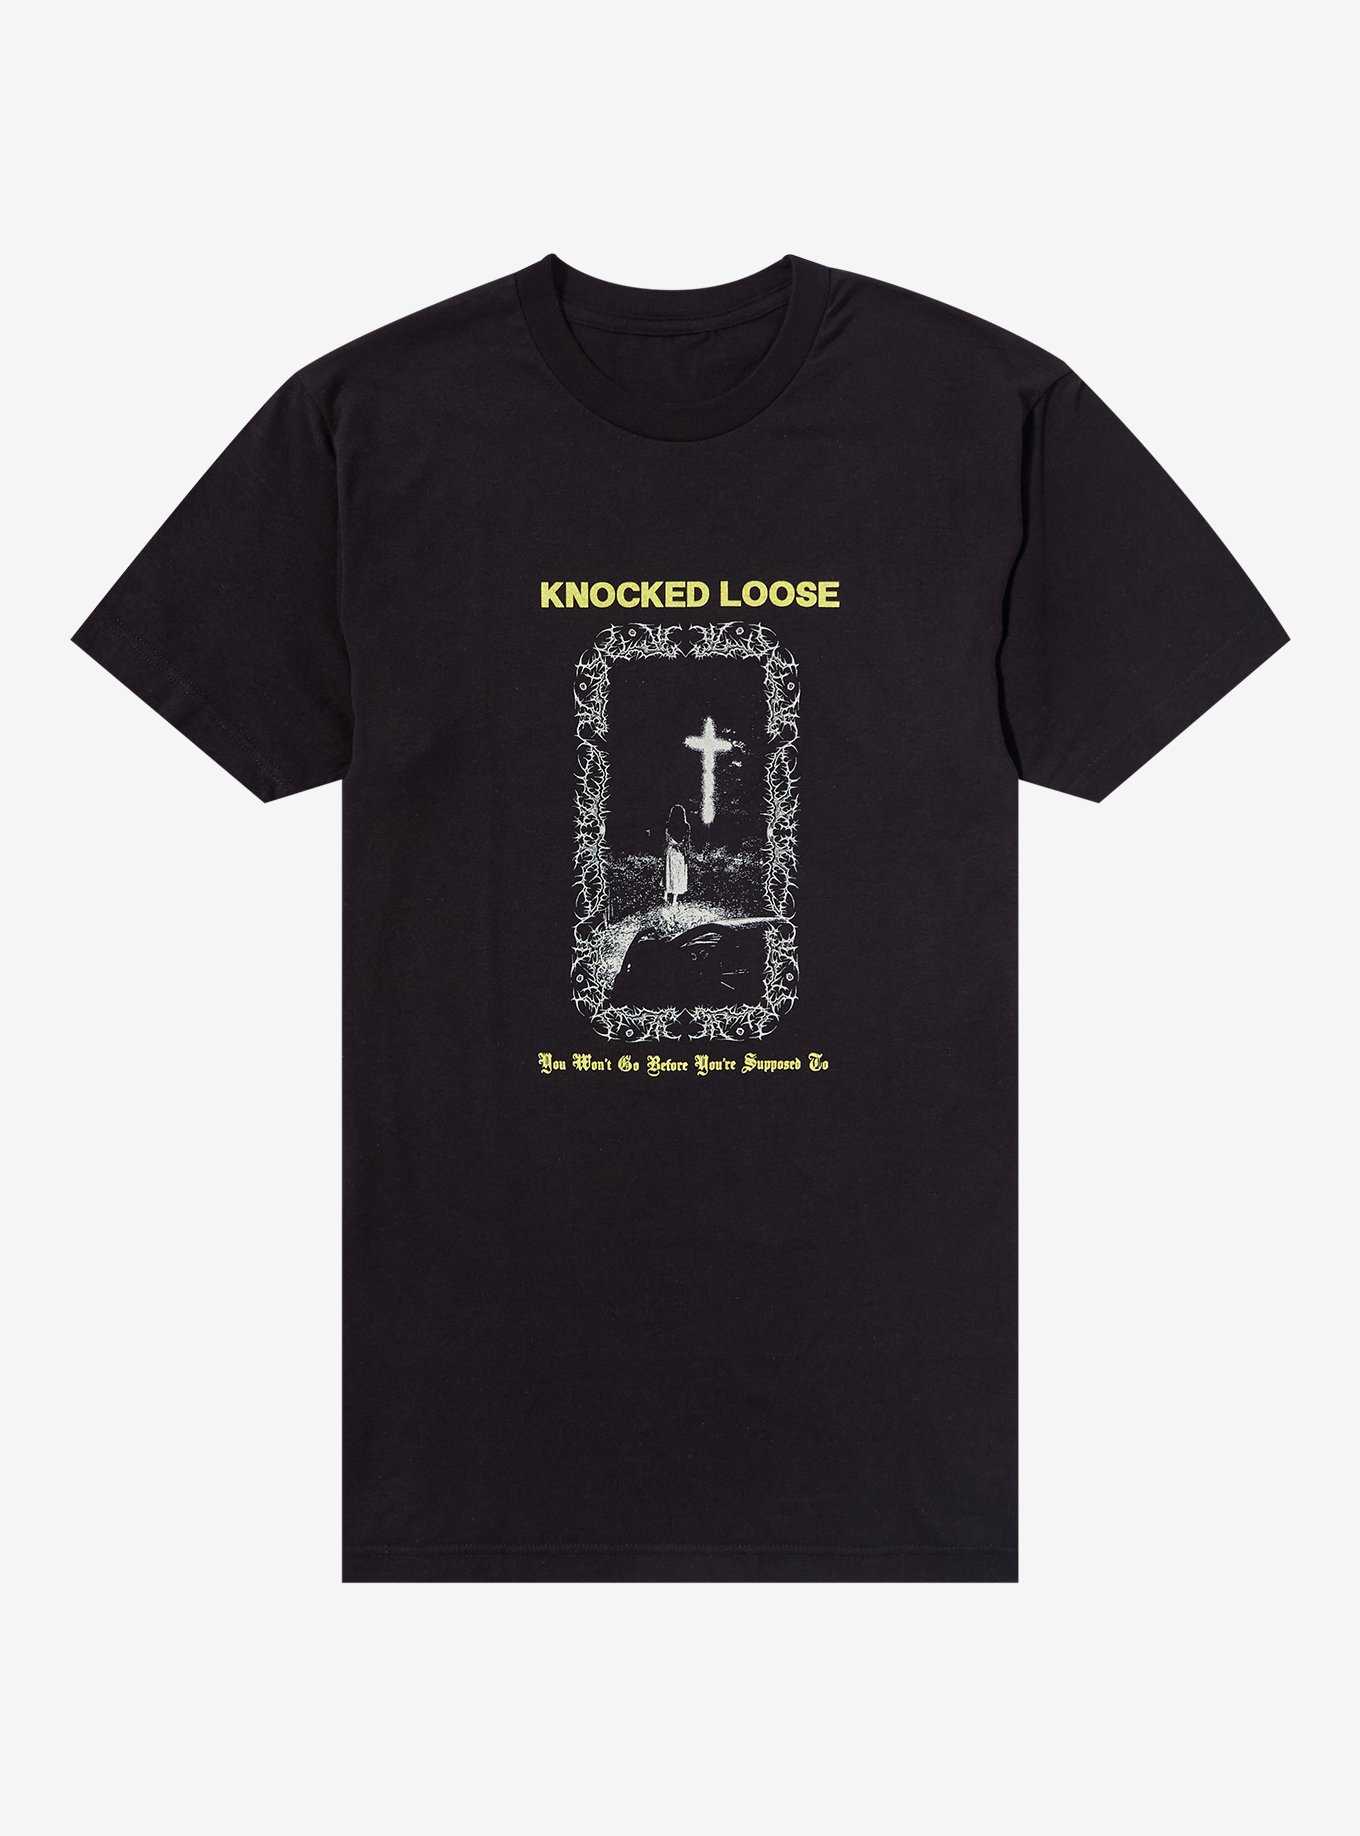 Knocked Loose You Won't Go Before You're Supposed To Album Artwork T-Shirt, , hi-res